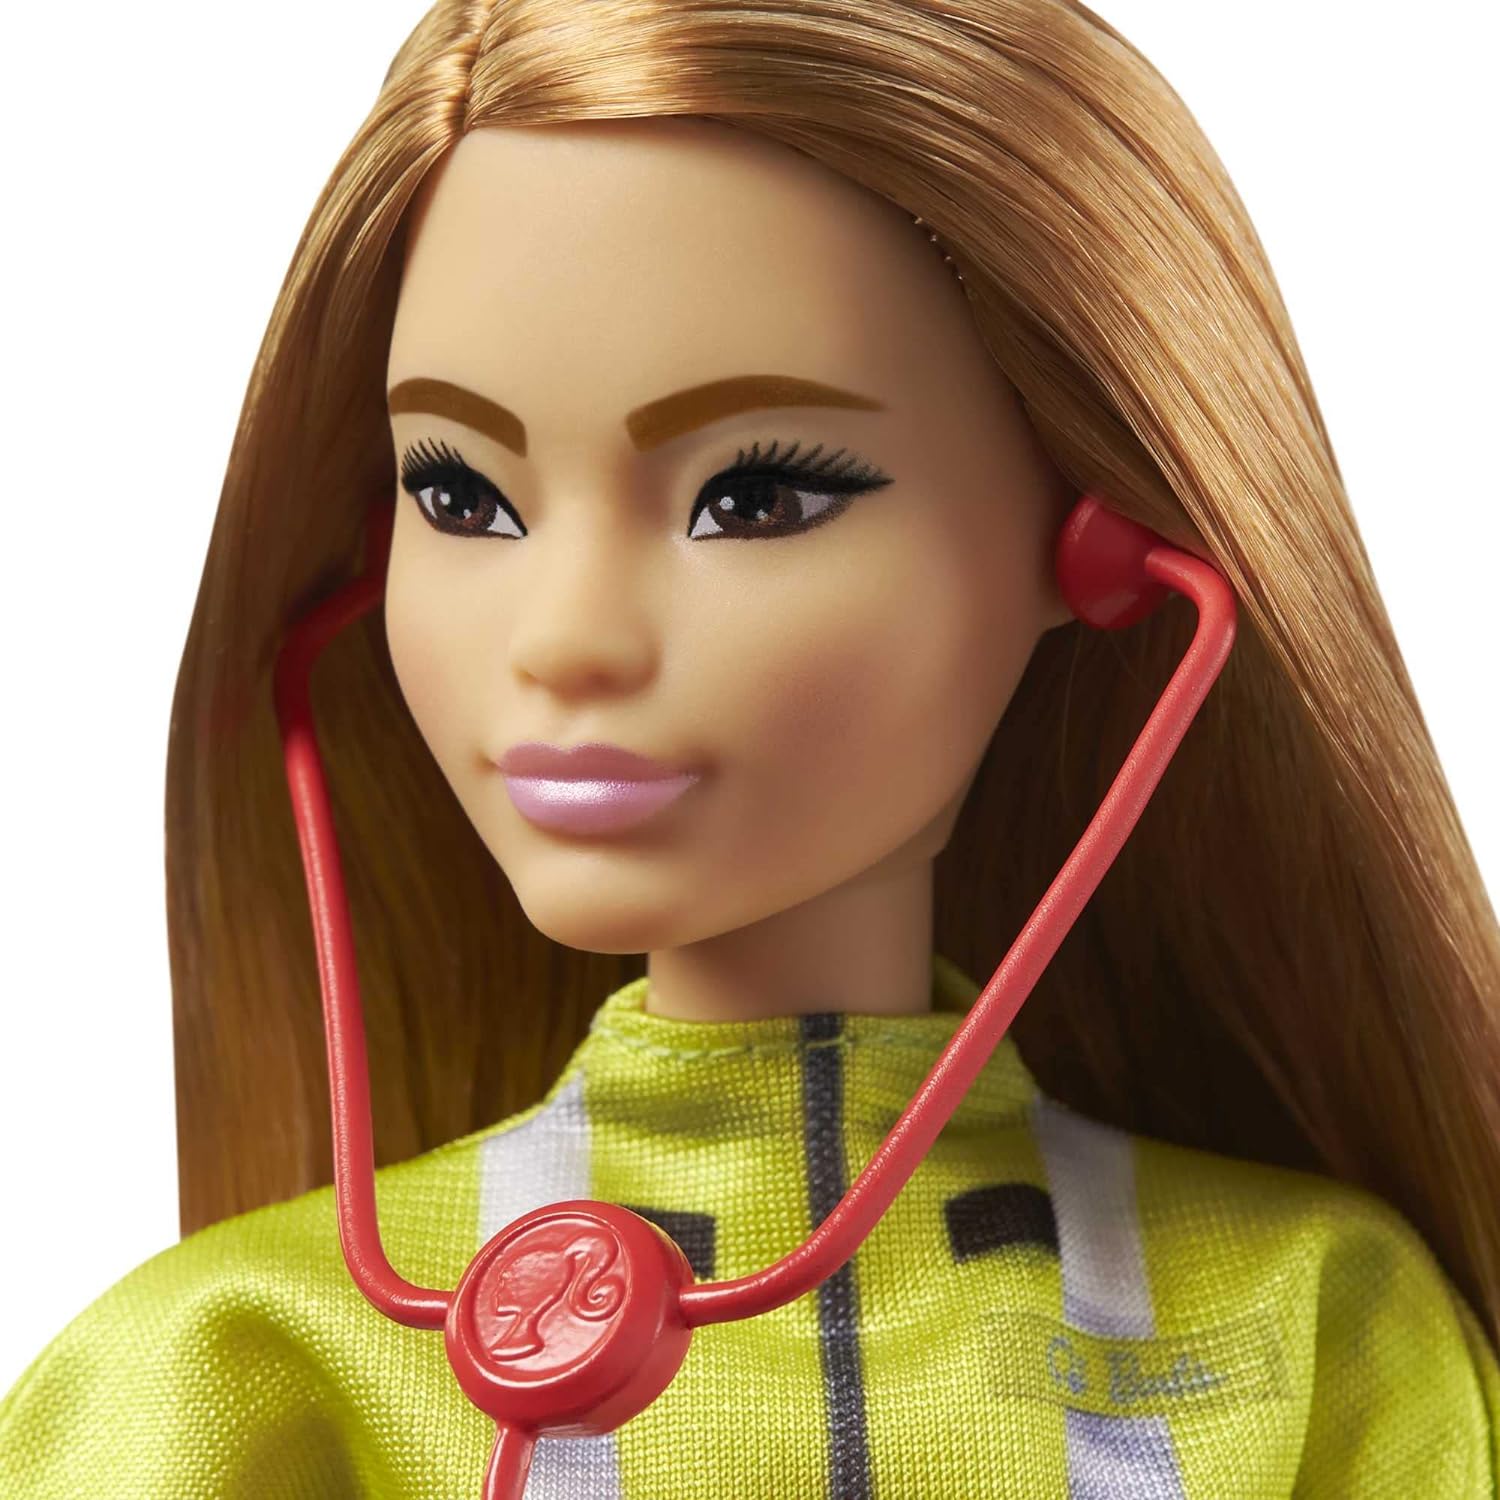 Barbie Paramedic Petite 12 Inch Fashion Doll with Brunette Hair, Stethoscope, Medical Bag & Accessories